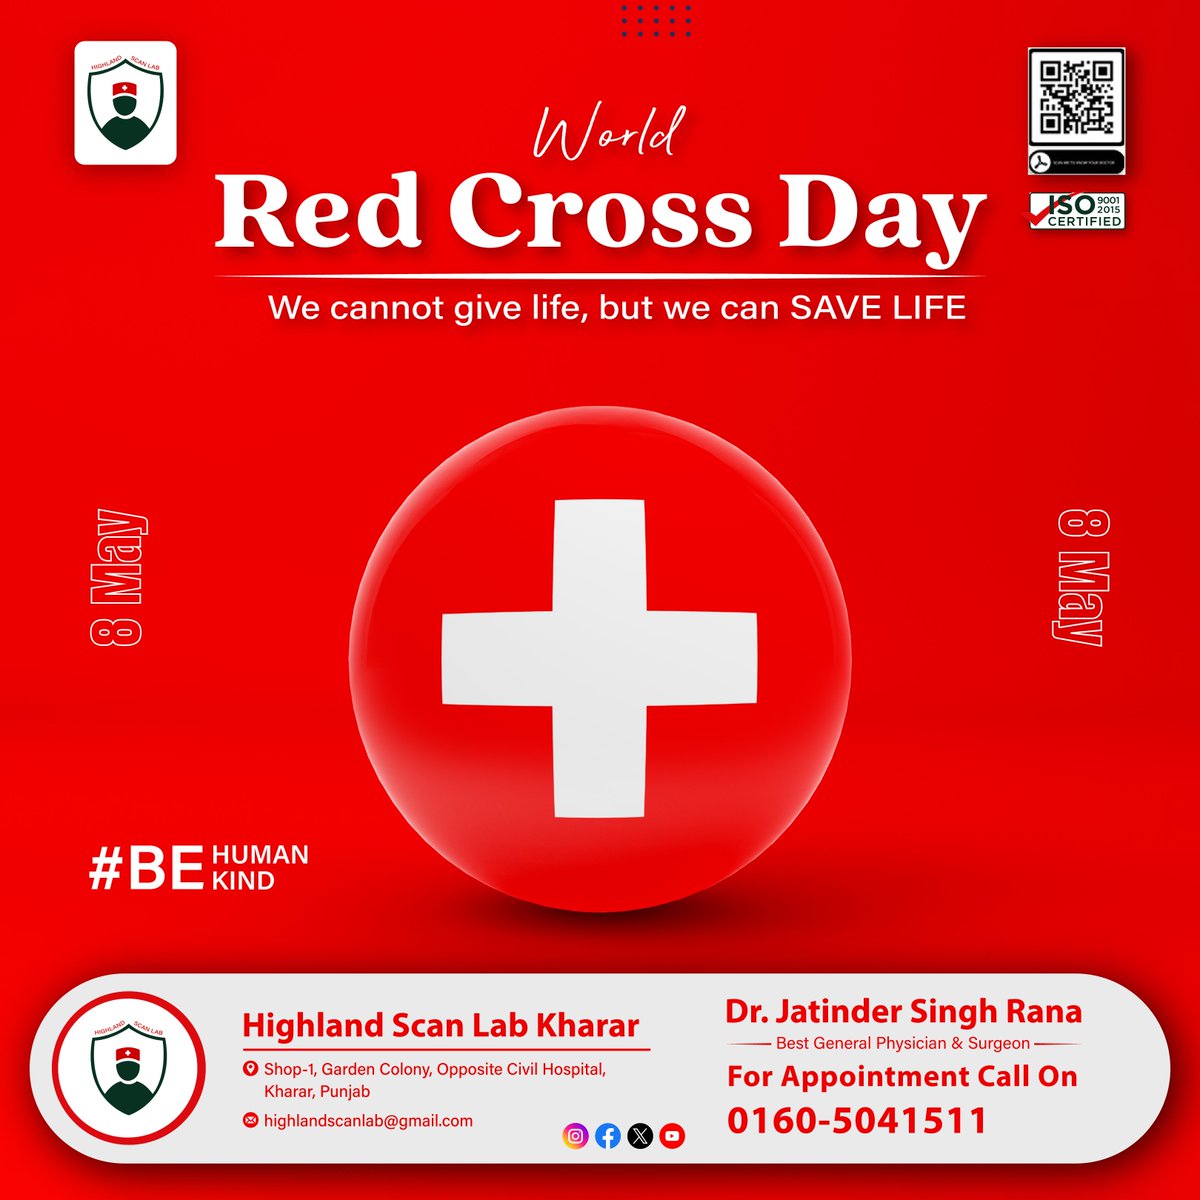 This #WorldRedCrossDay, let's salute the spirit of selflessness. With #HighlandScanLab, we stand in solidarity with the Red Cross, to save lives and support people's #health. Together, we can make a difference!
.
#TakeControl #bloodtest #Drjatindersingh #Diagnostics #kharar #path